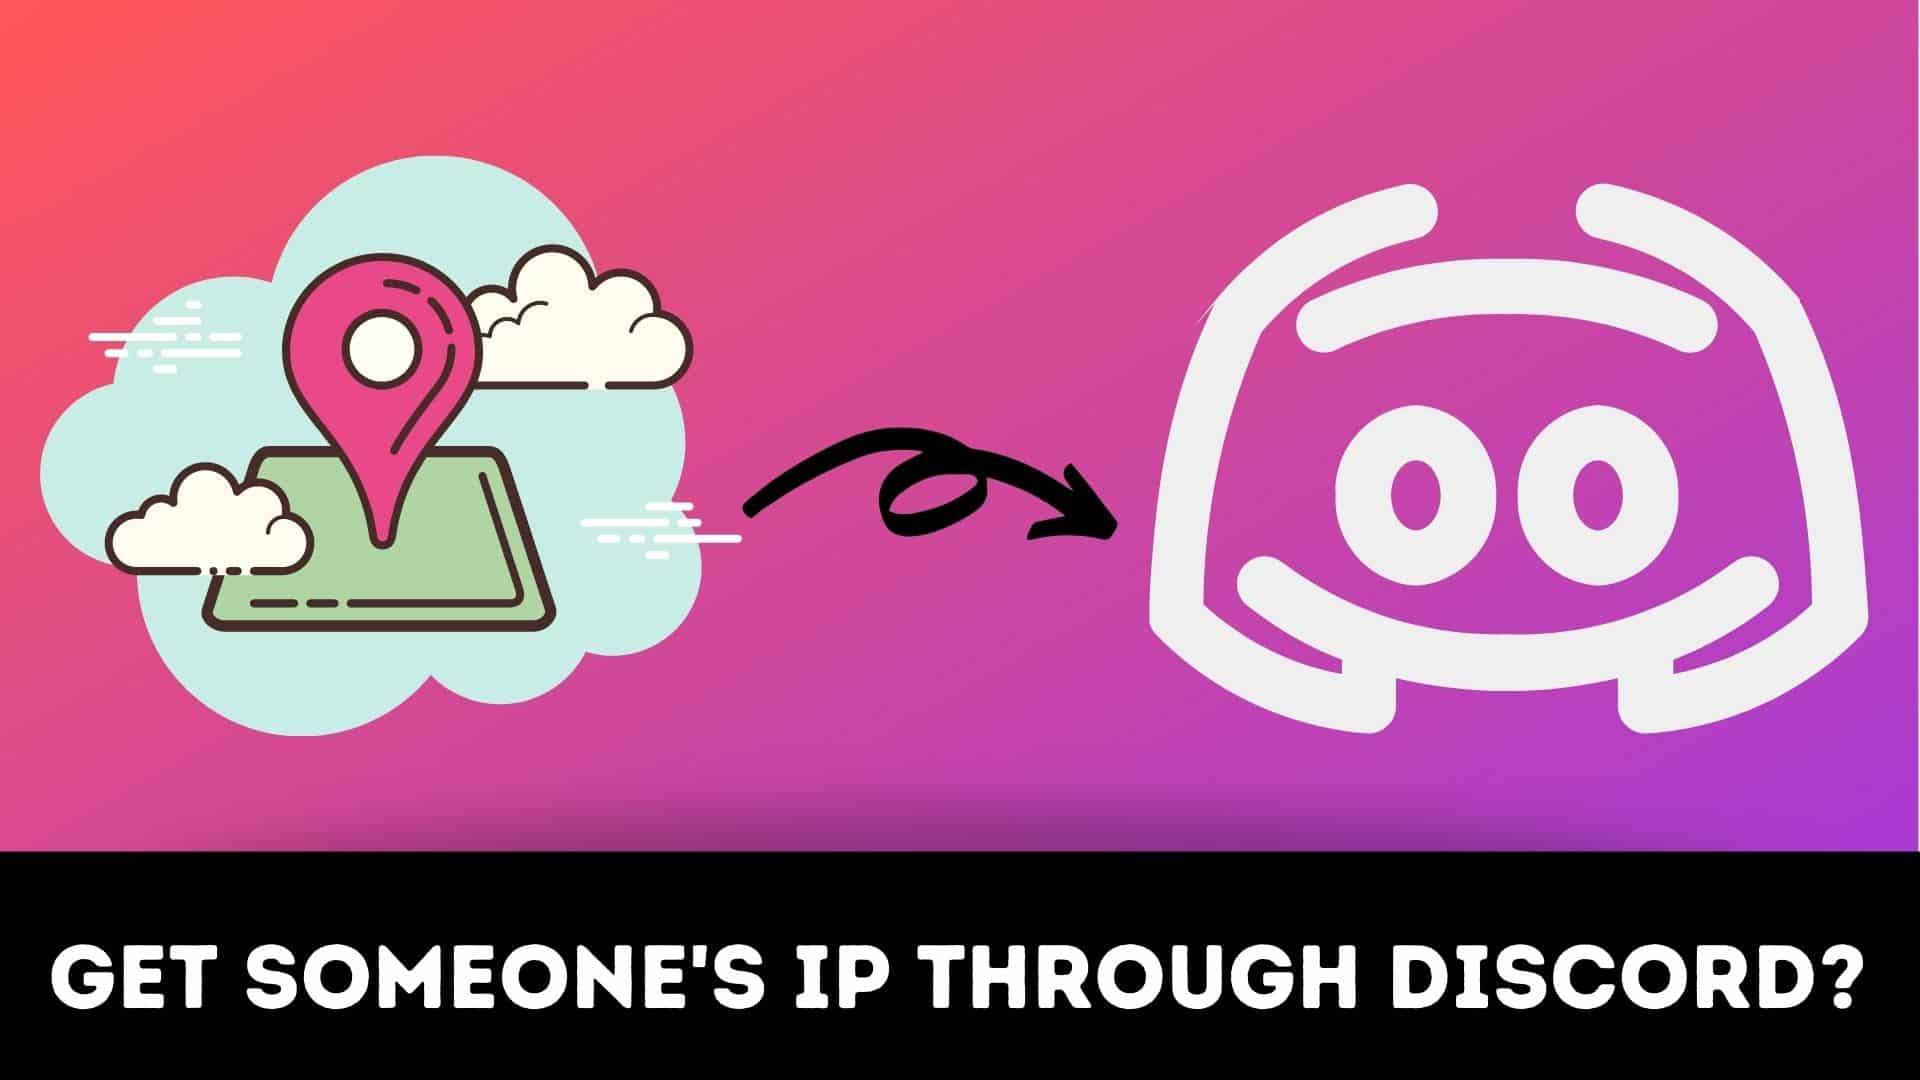 How to get someone's IP through Discord?